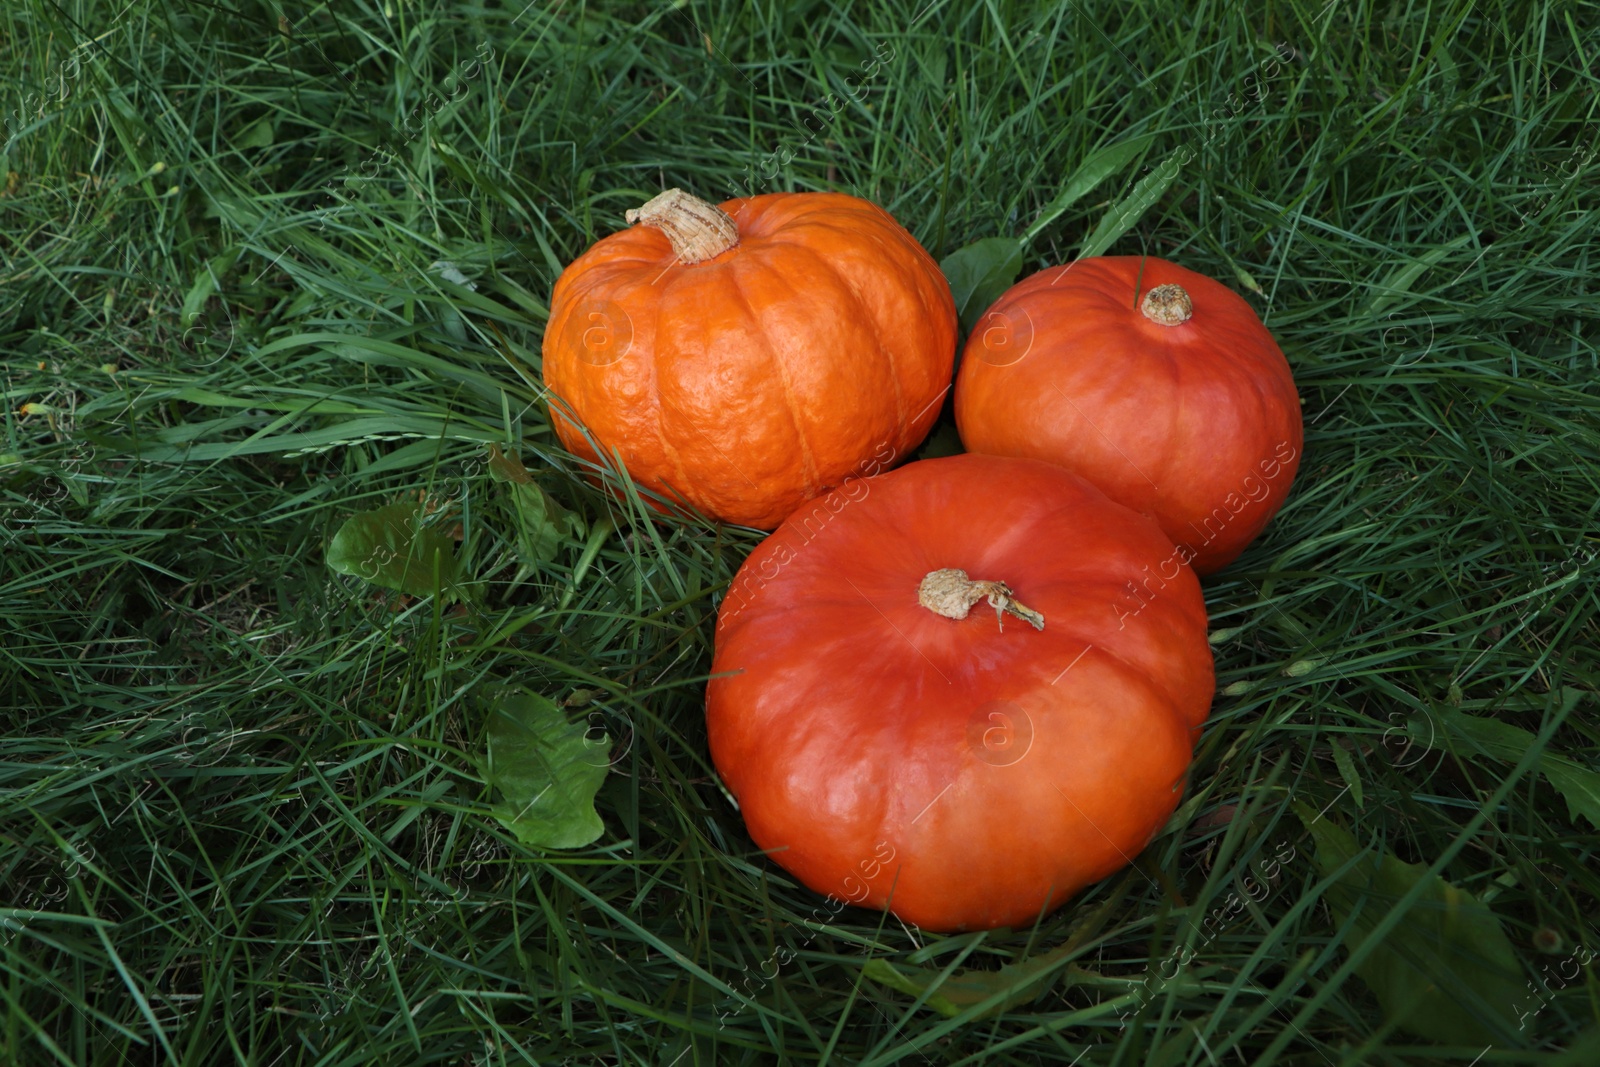 Photo of Whole ripe orange pumpkins among green grass outdoors. Space for text